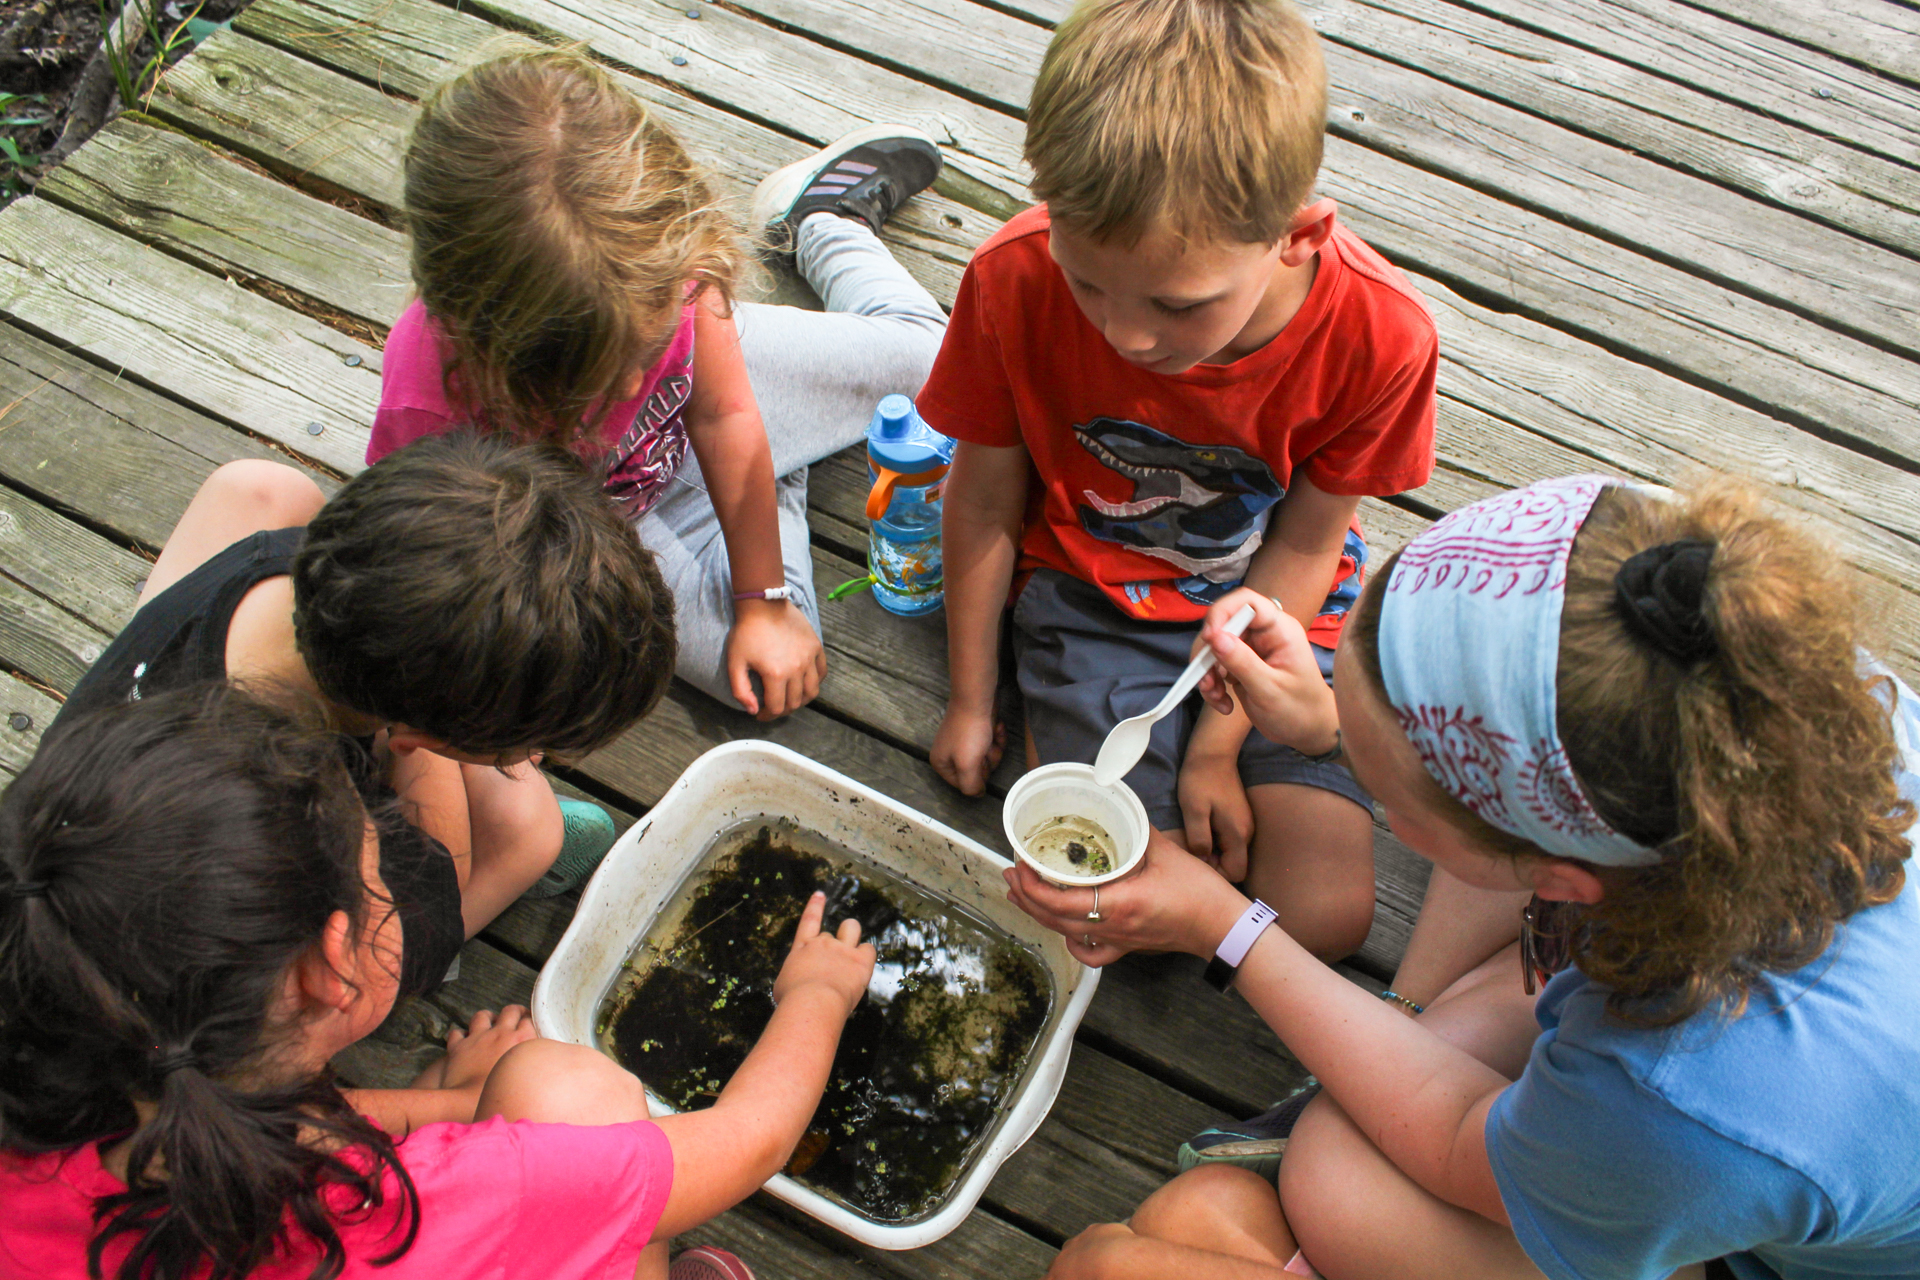 Viewed from above, a group of Broadmoor campers kneels around a white bin filled with water and mud while a counselor shows them an aquatic invertebrate in a sample cup